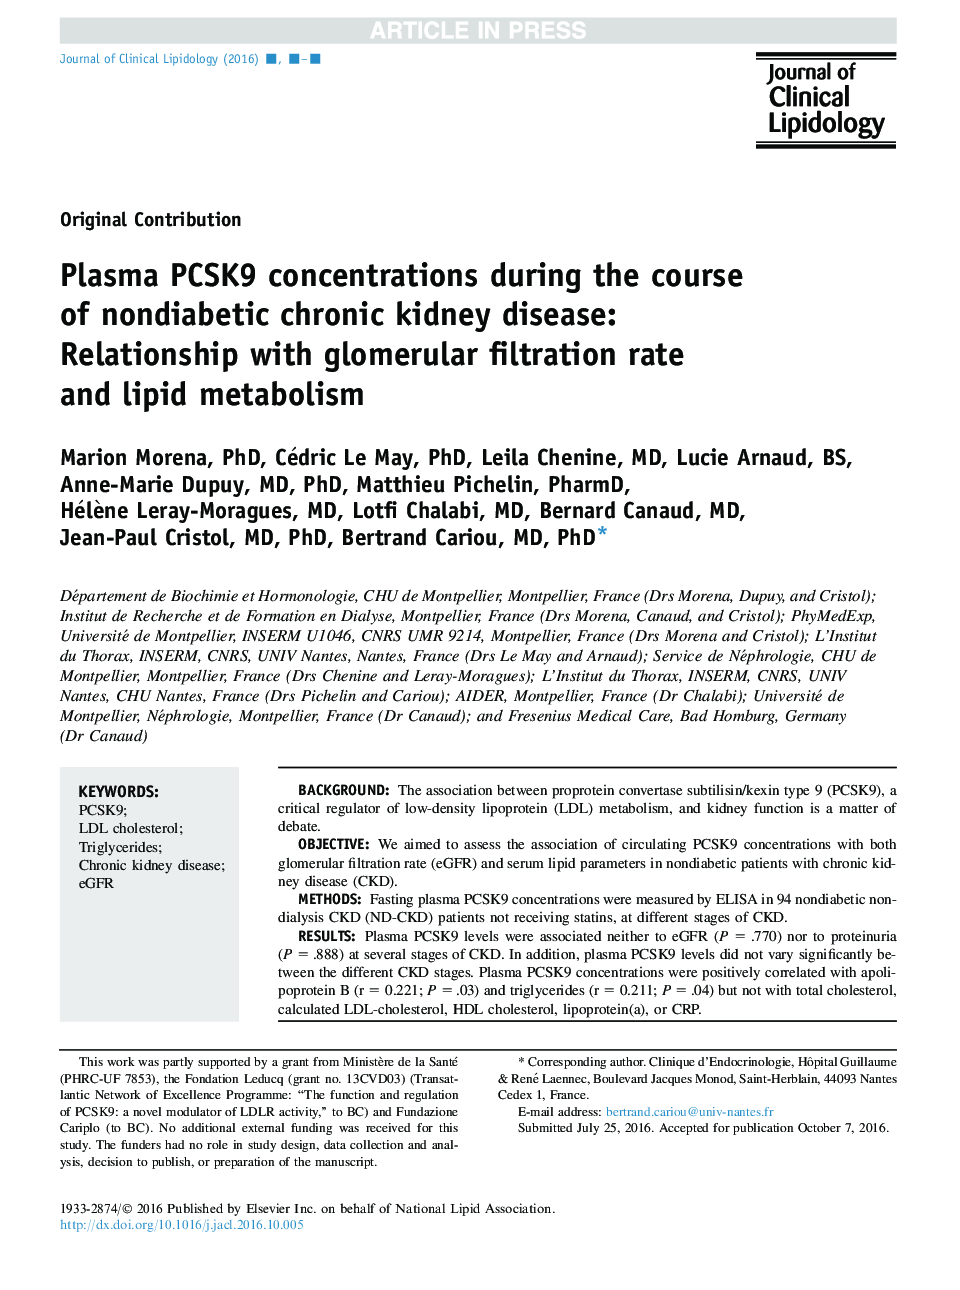 Plasma PCSK9 concentrations during the course of nondiabetic chronic kidney disease: Relationship with glomerular filtration rate and lipid metabolism